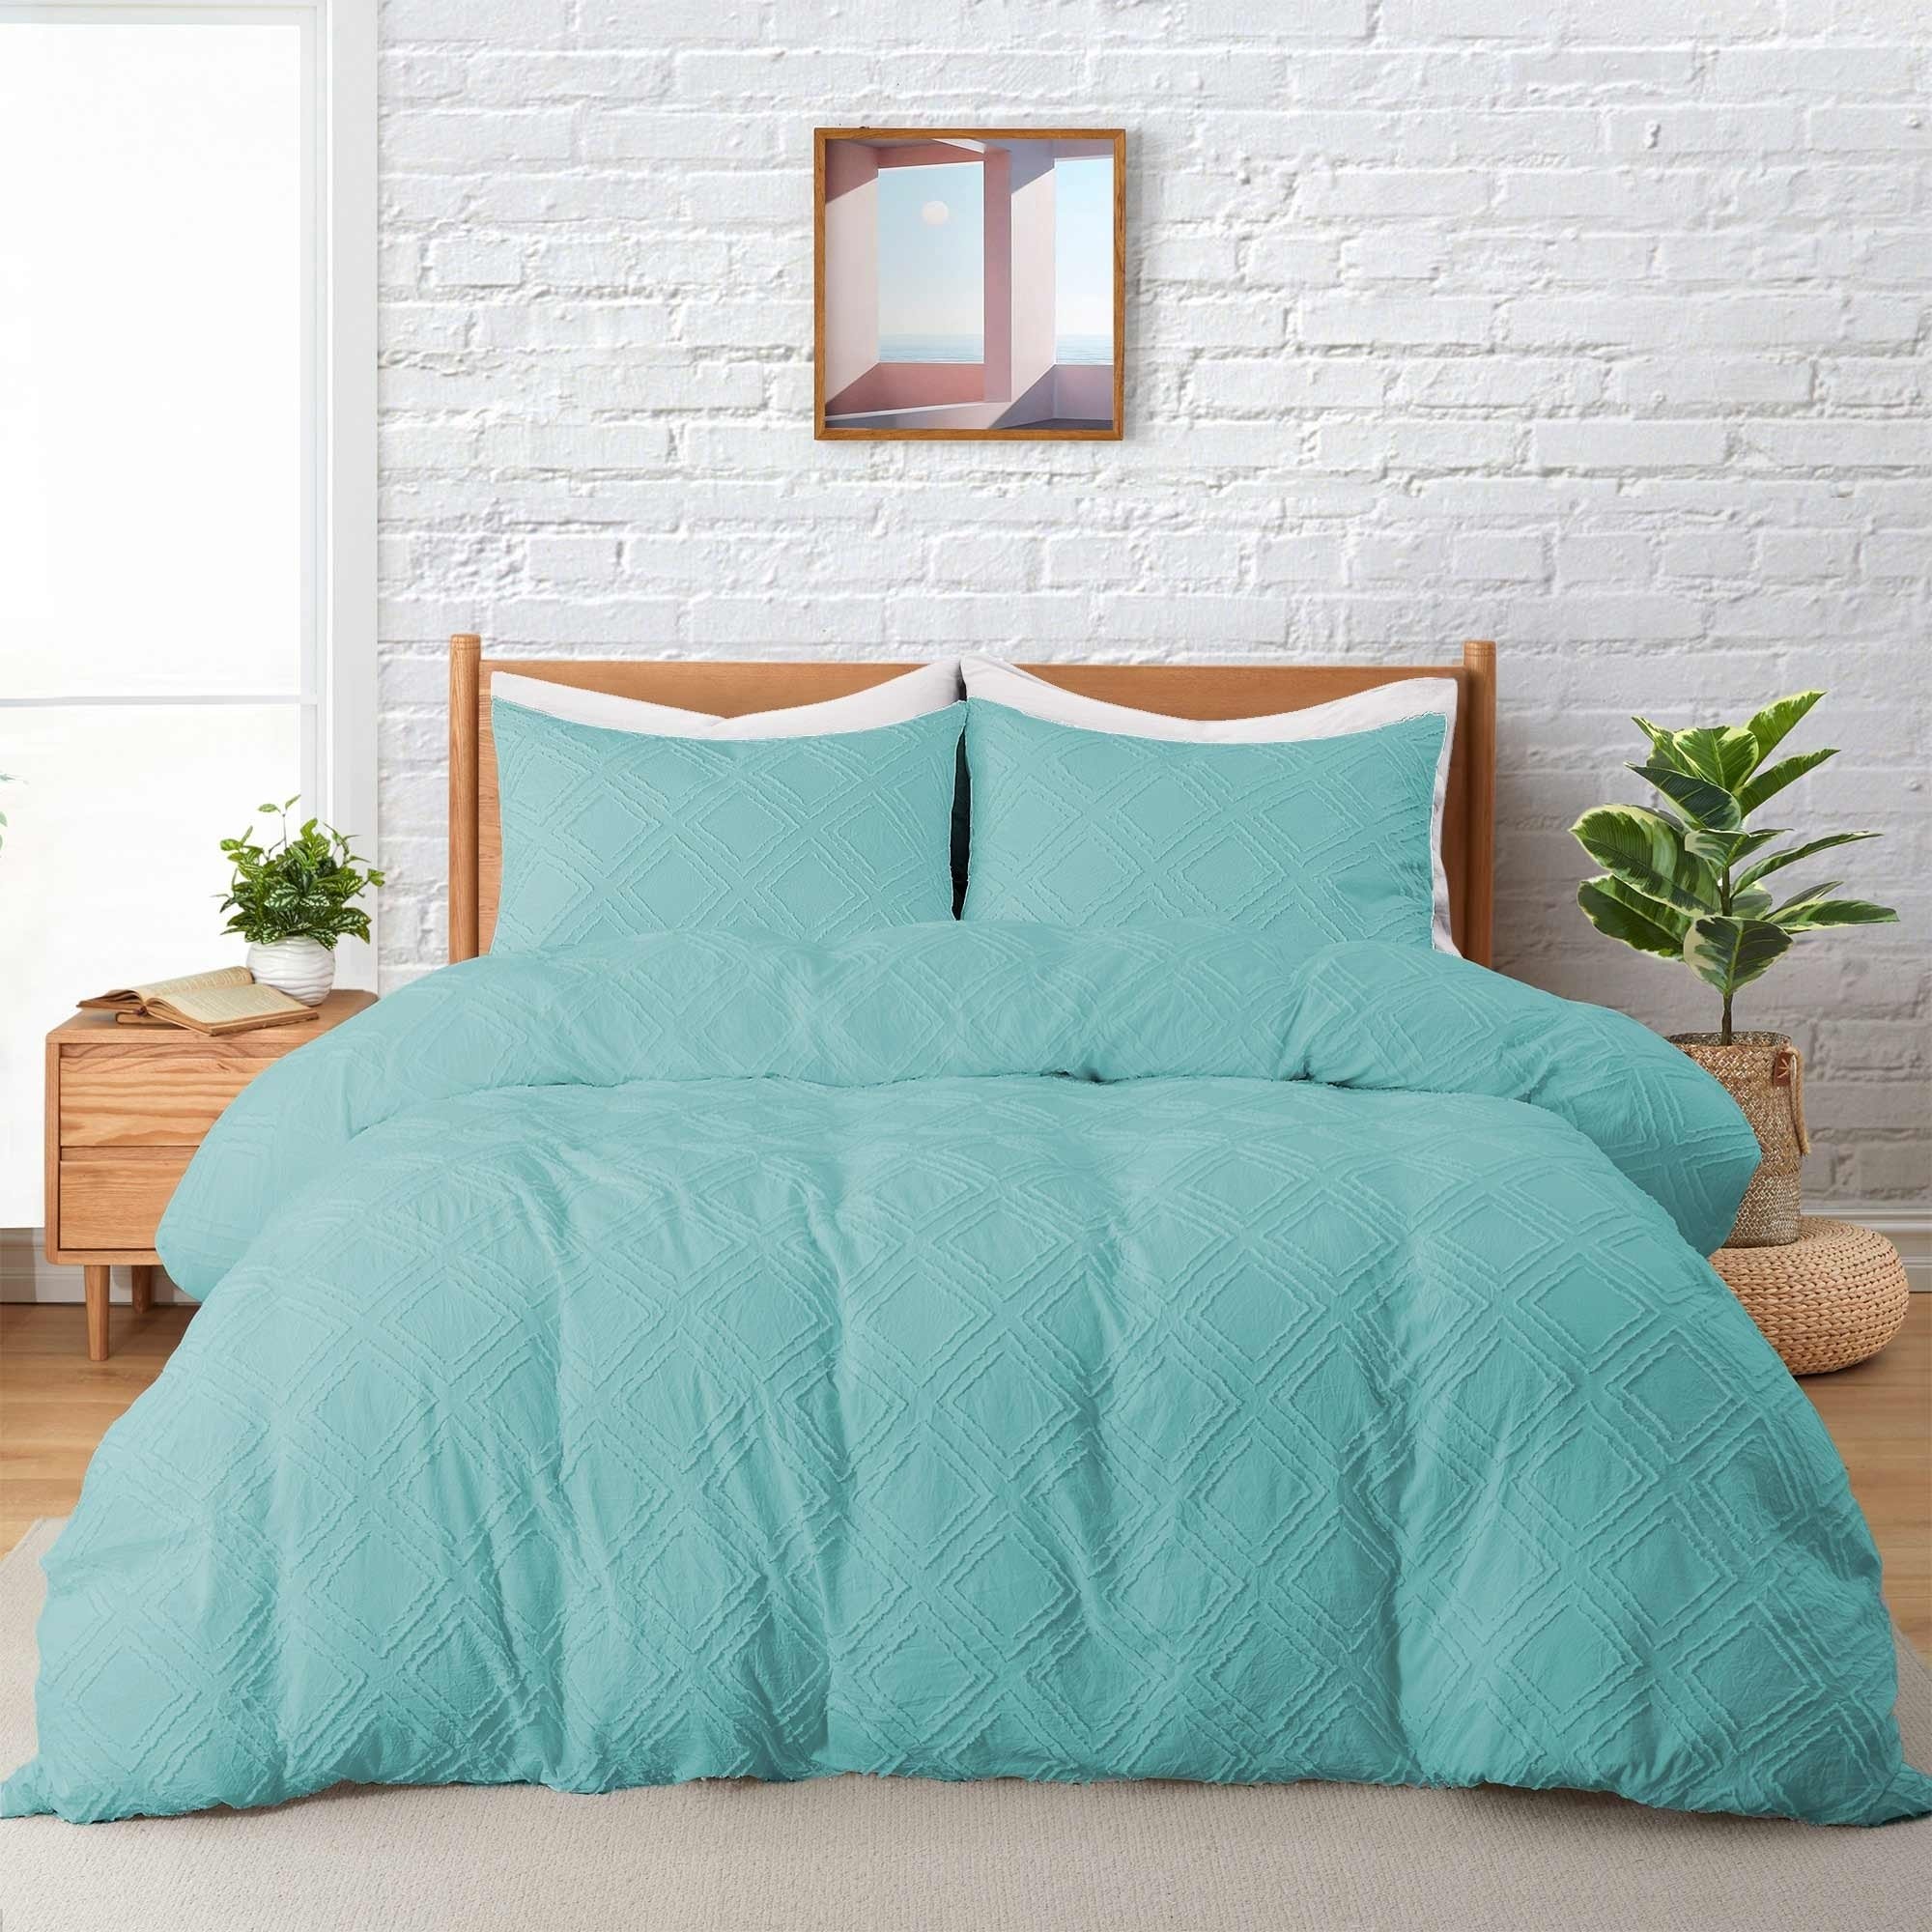 Clipped Jacquard Duvet Cover Set With Shams - Teal/Square, King